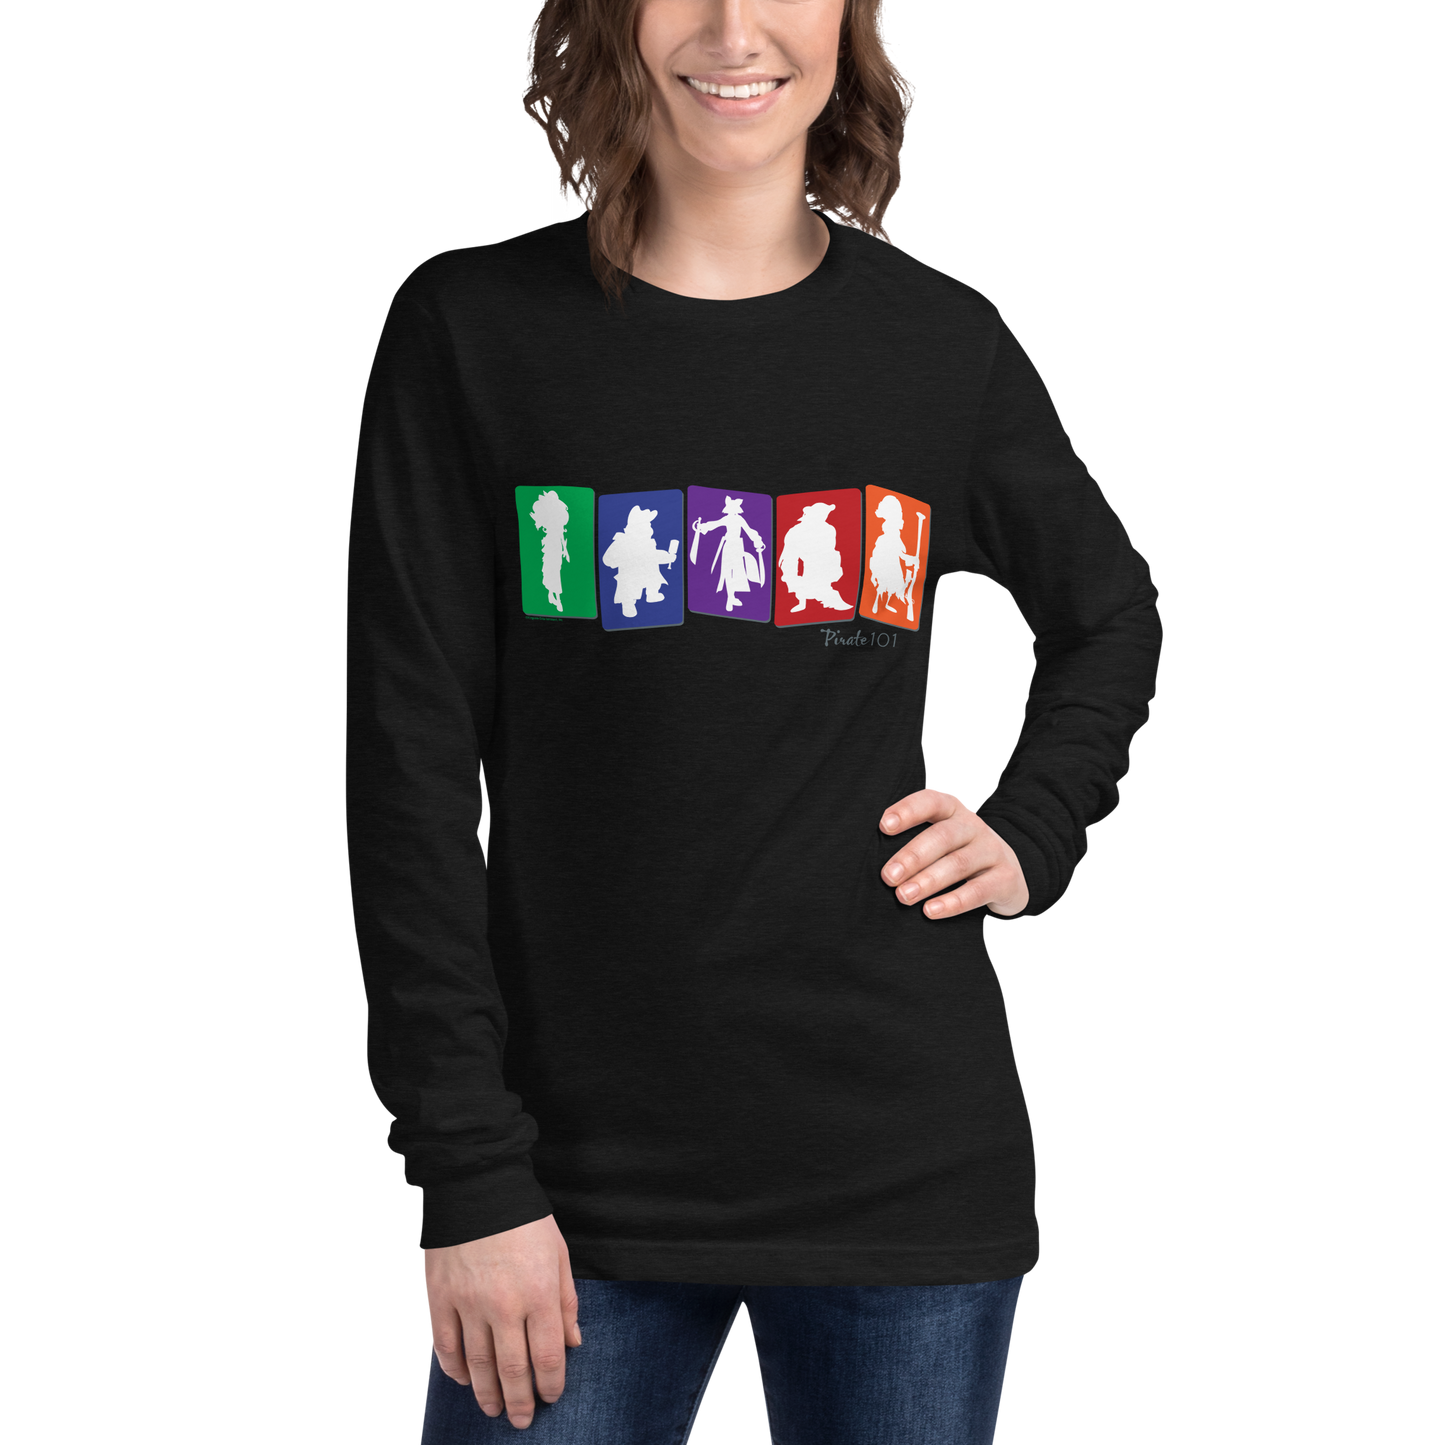 Pirate101-Class-Banner-Icon-Unisex-Graphic-Long-Sleeve-Shirt3-witchdoctor-privateer-swashbuckler-musketeer-buccaneer